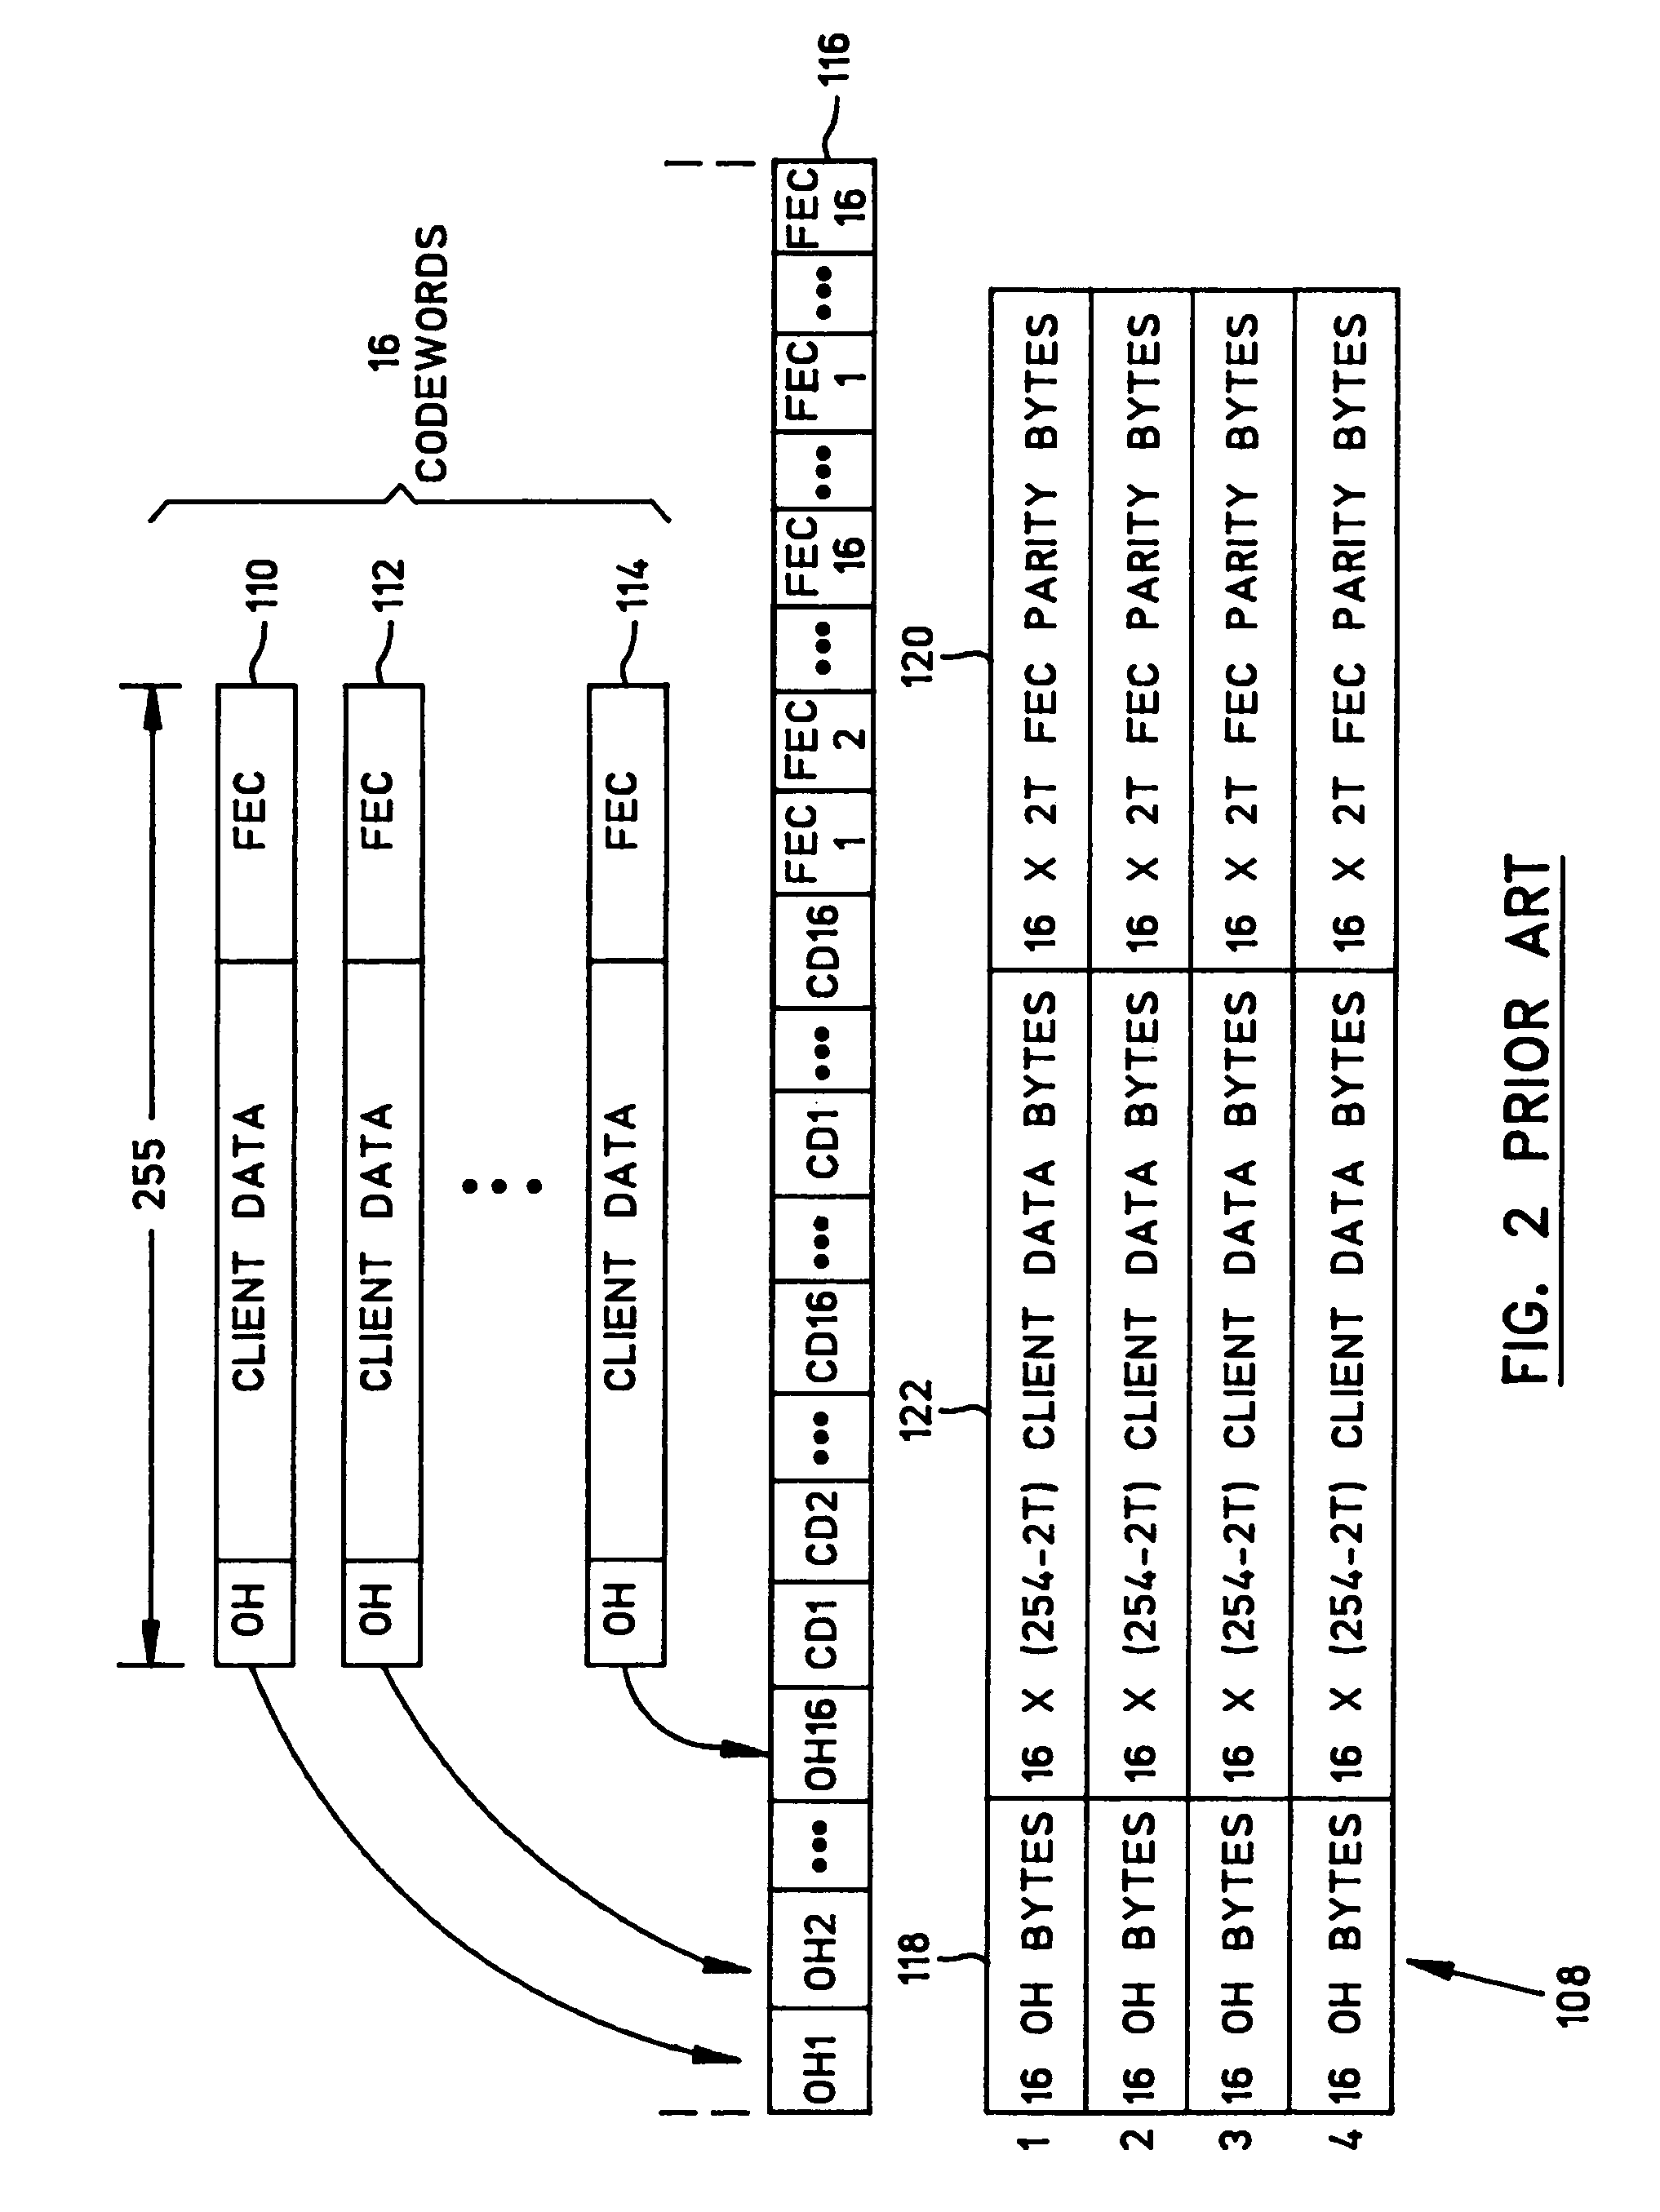 Optical transport network frame structure with in-band data channel and forward error correction